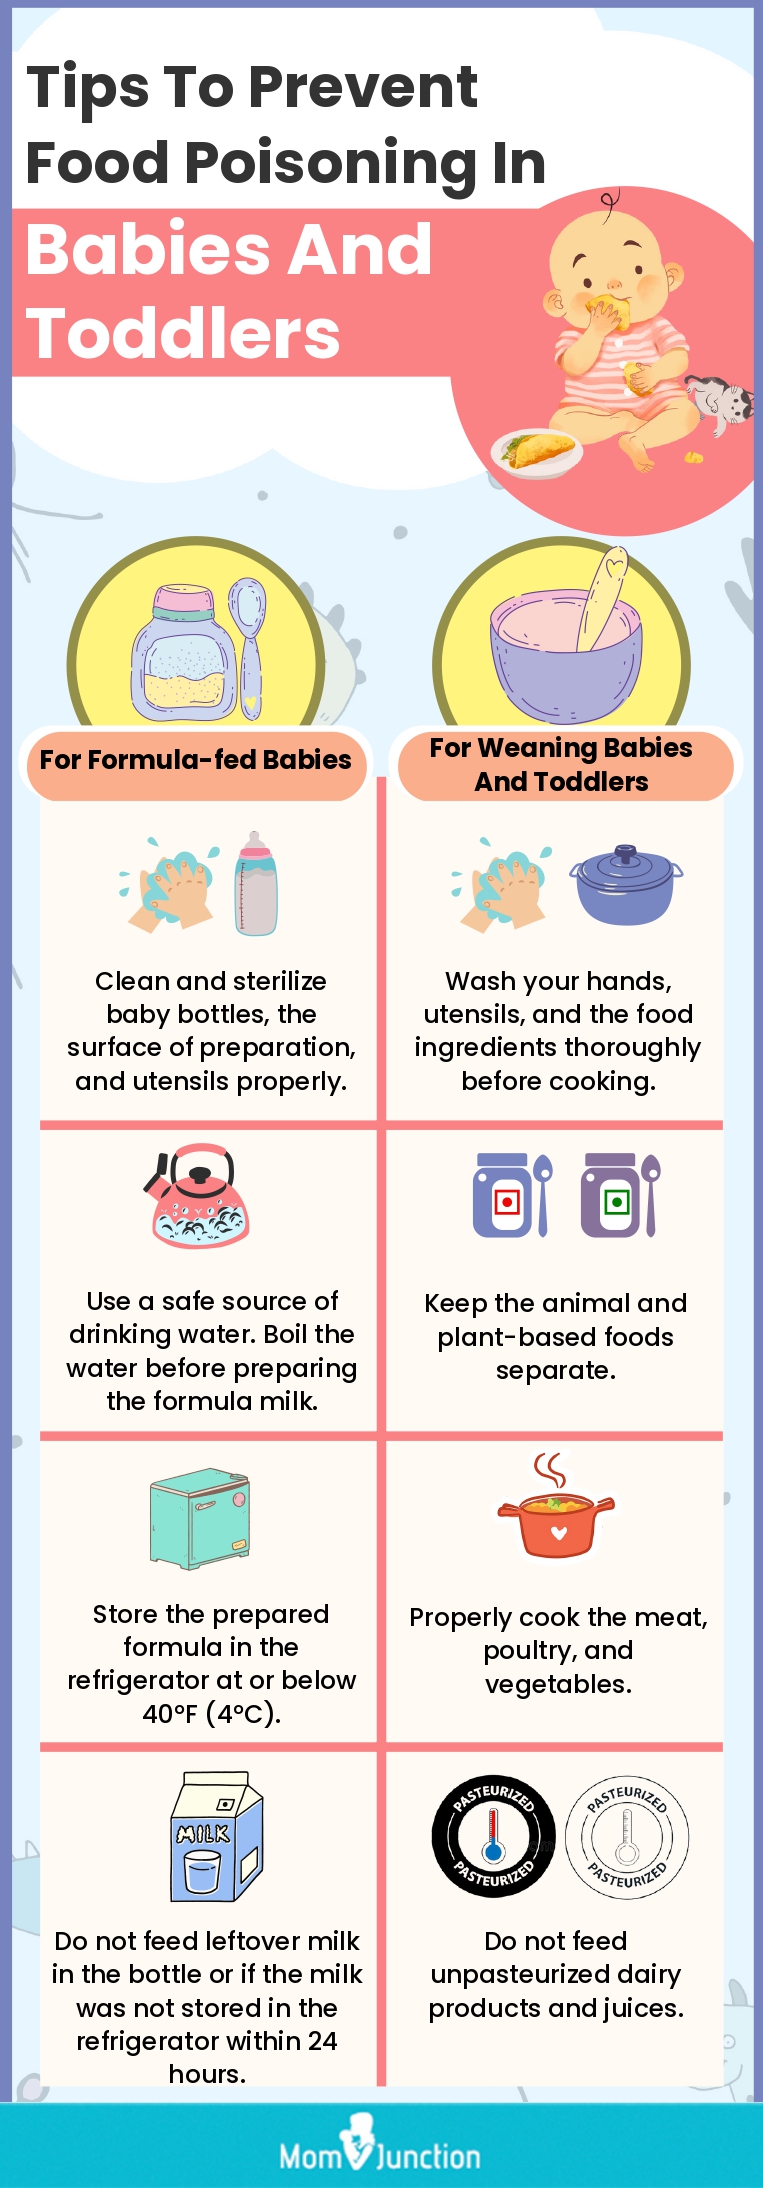 tips to prevent food poisoning in babies and toddlers(infographic)